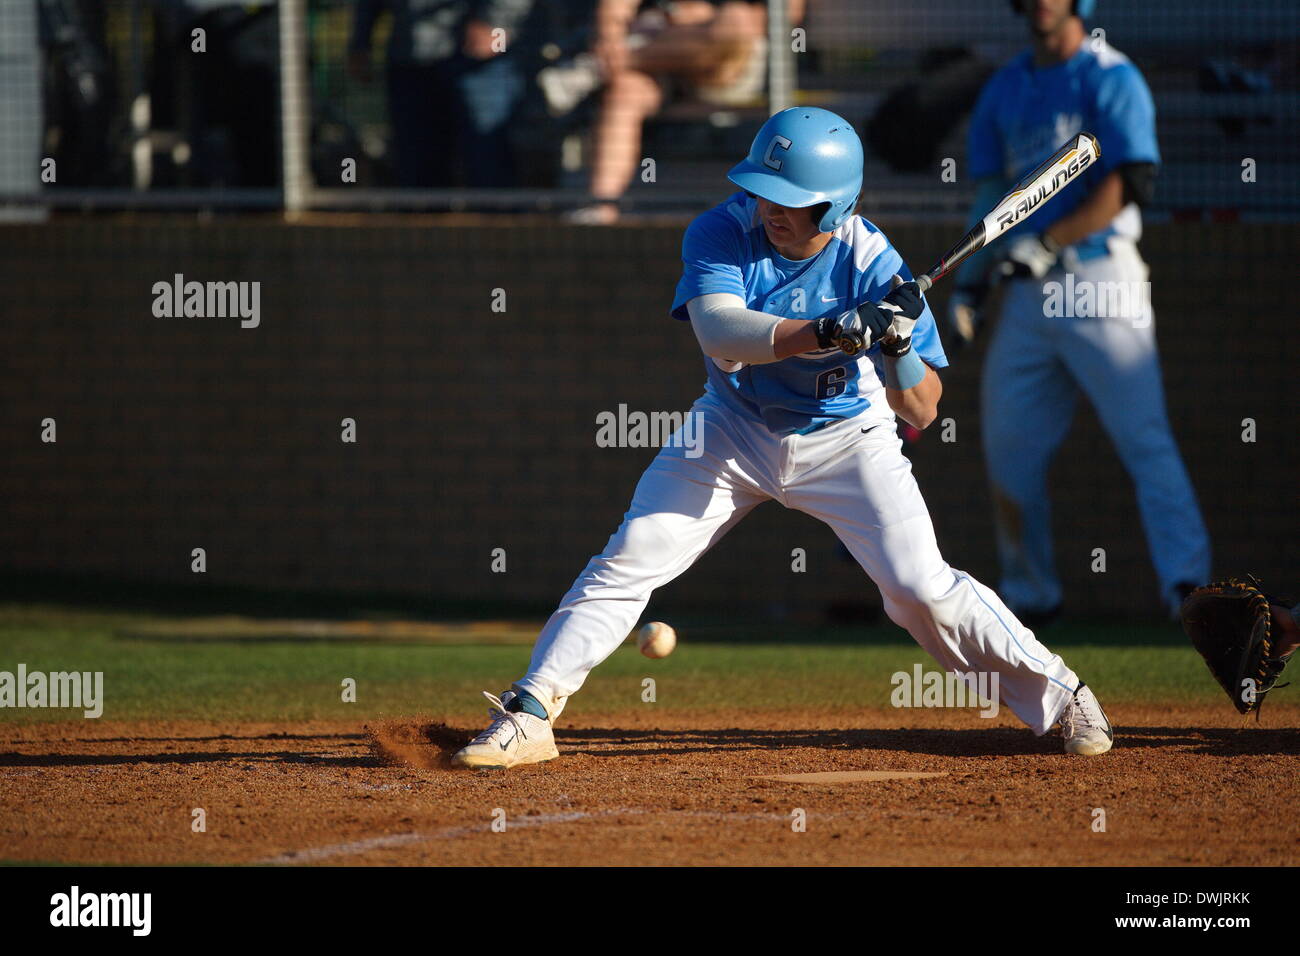 Kennesaw, Georgia, USA.  March 8, 2014 -- Columbia's Kyle Bartelman (6) at bat during Saturday's doubleheader between Columbia University and Kennesaw State University.  The teams split the doubleheader.  Columbia one the first game 9-3.  KSU won the night cap 15-1. Credit:  Wayne Hughes | Alamy Live News Stock Photo